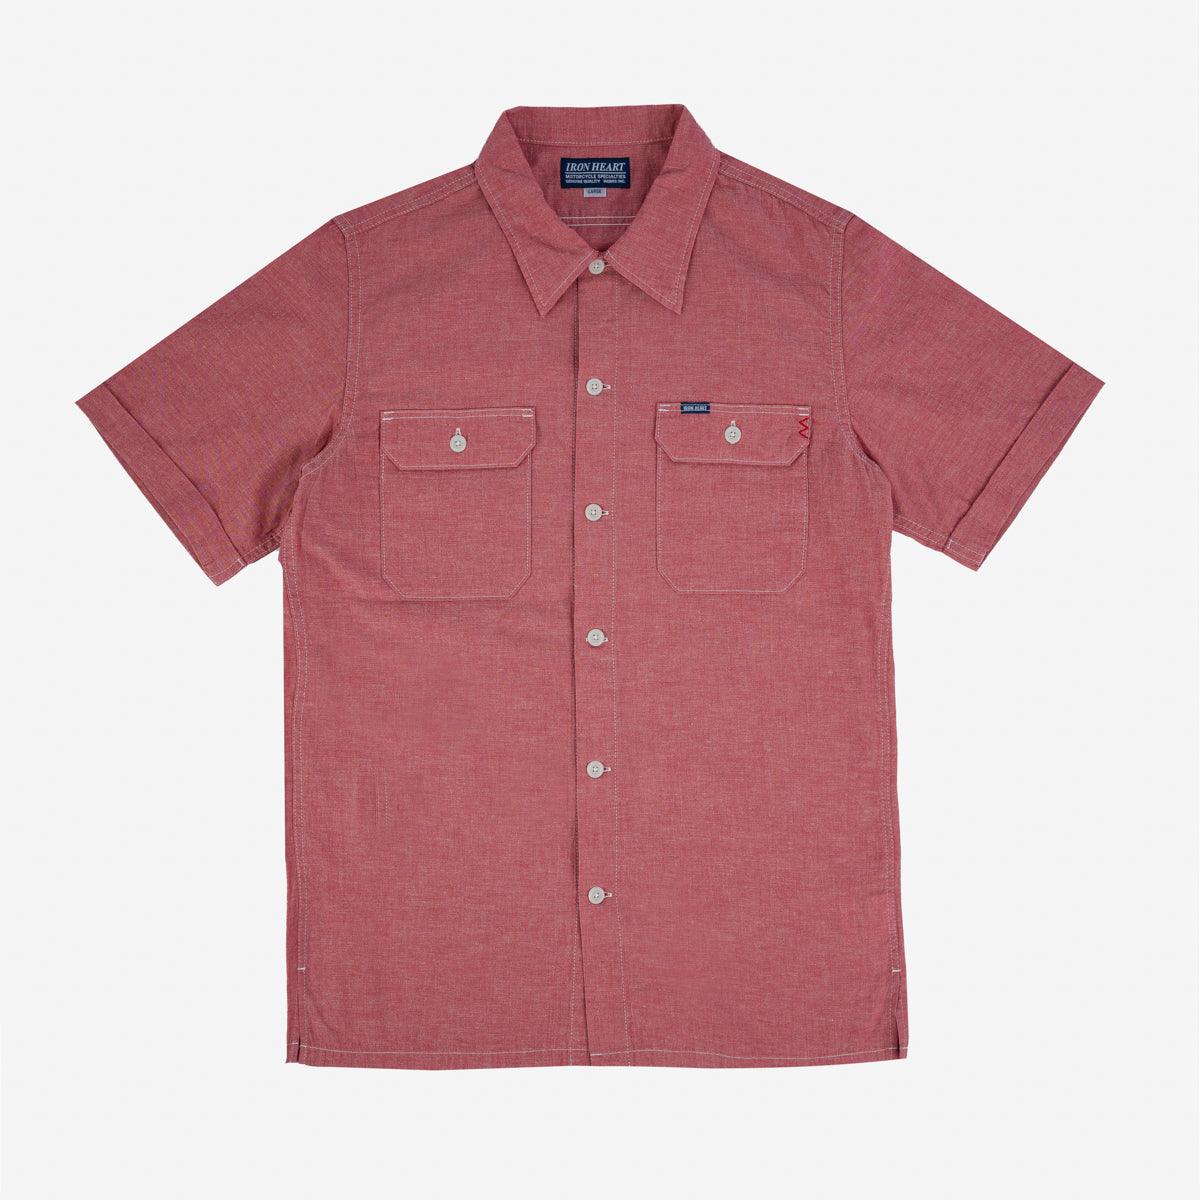 Image showing the IHSH-388-RED - 4oz Short Sleeved Summer Shirt - Red which is a Shirts described by the following info SS24 and sold on the IRON HEART GERMANY online store